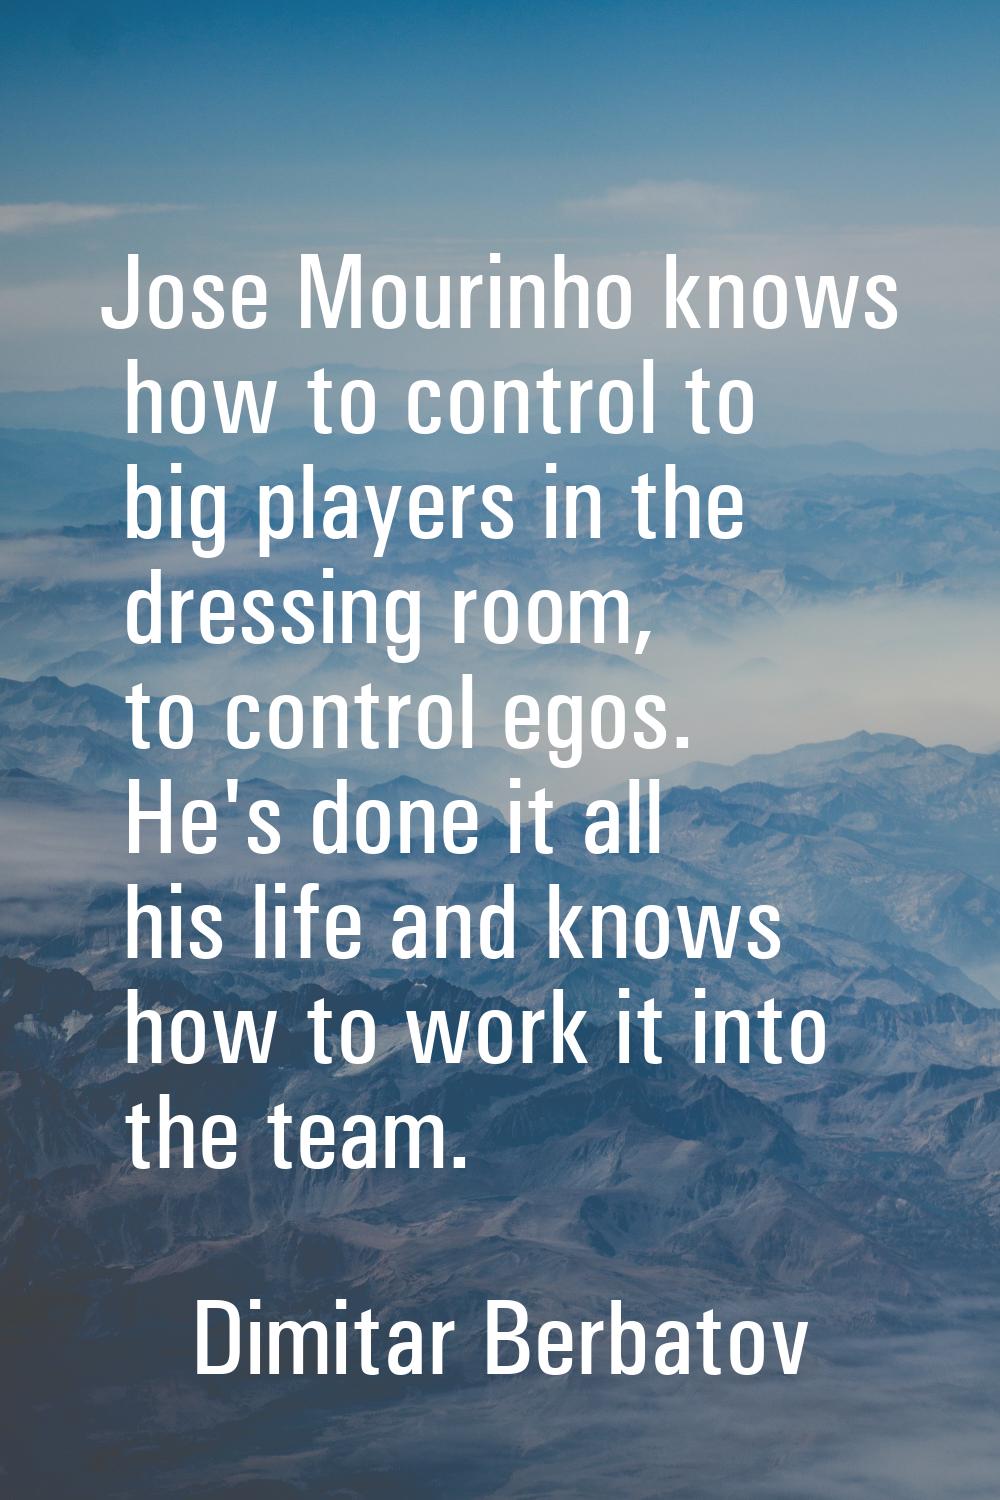 Jose Mourinho knows how to control to big players in the dressing room, to control egos. He's done 